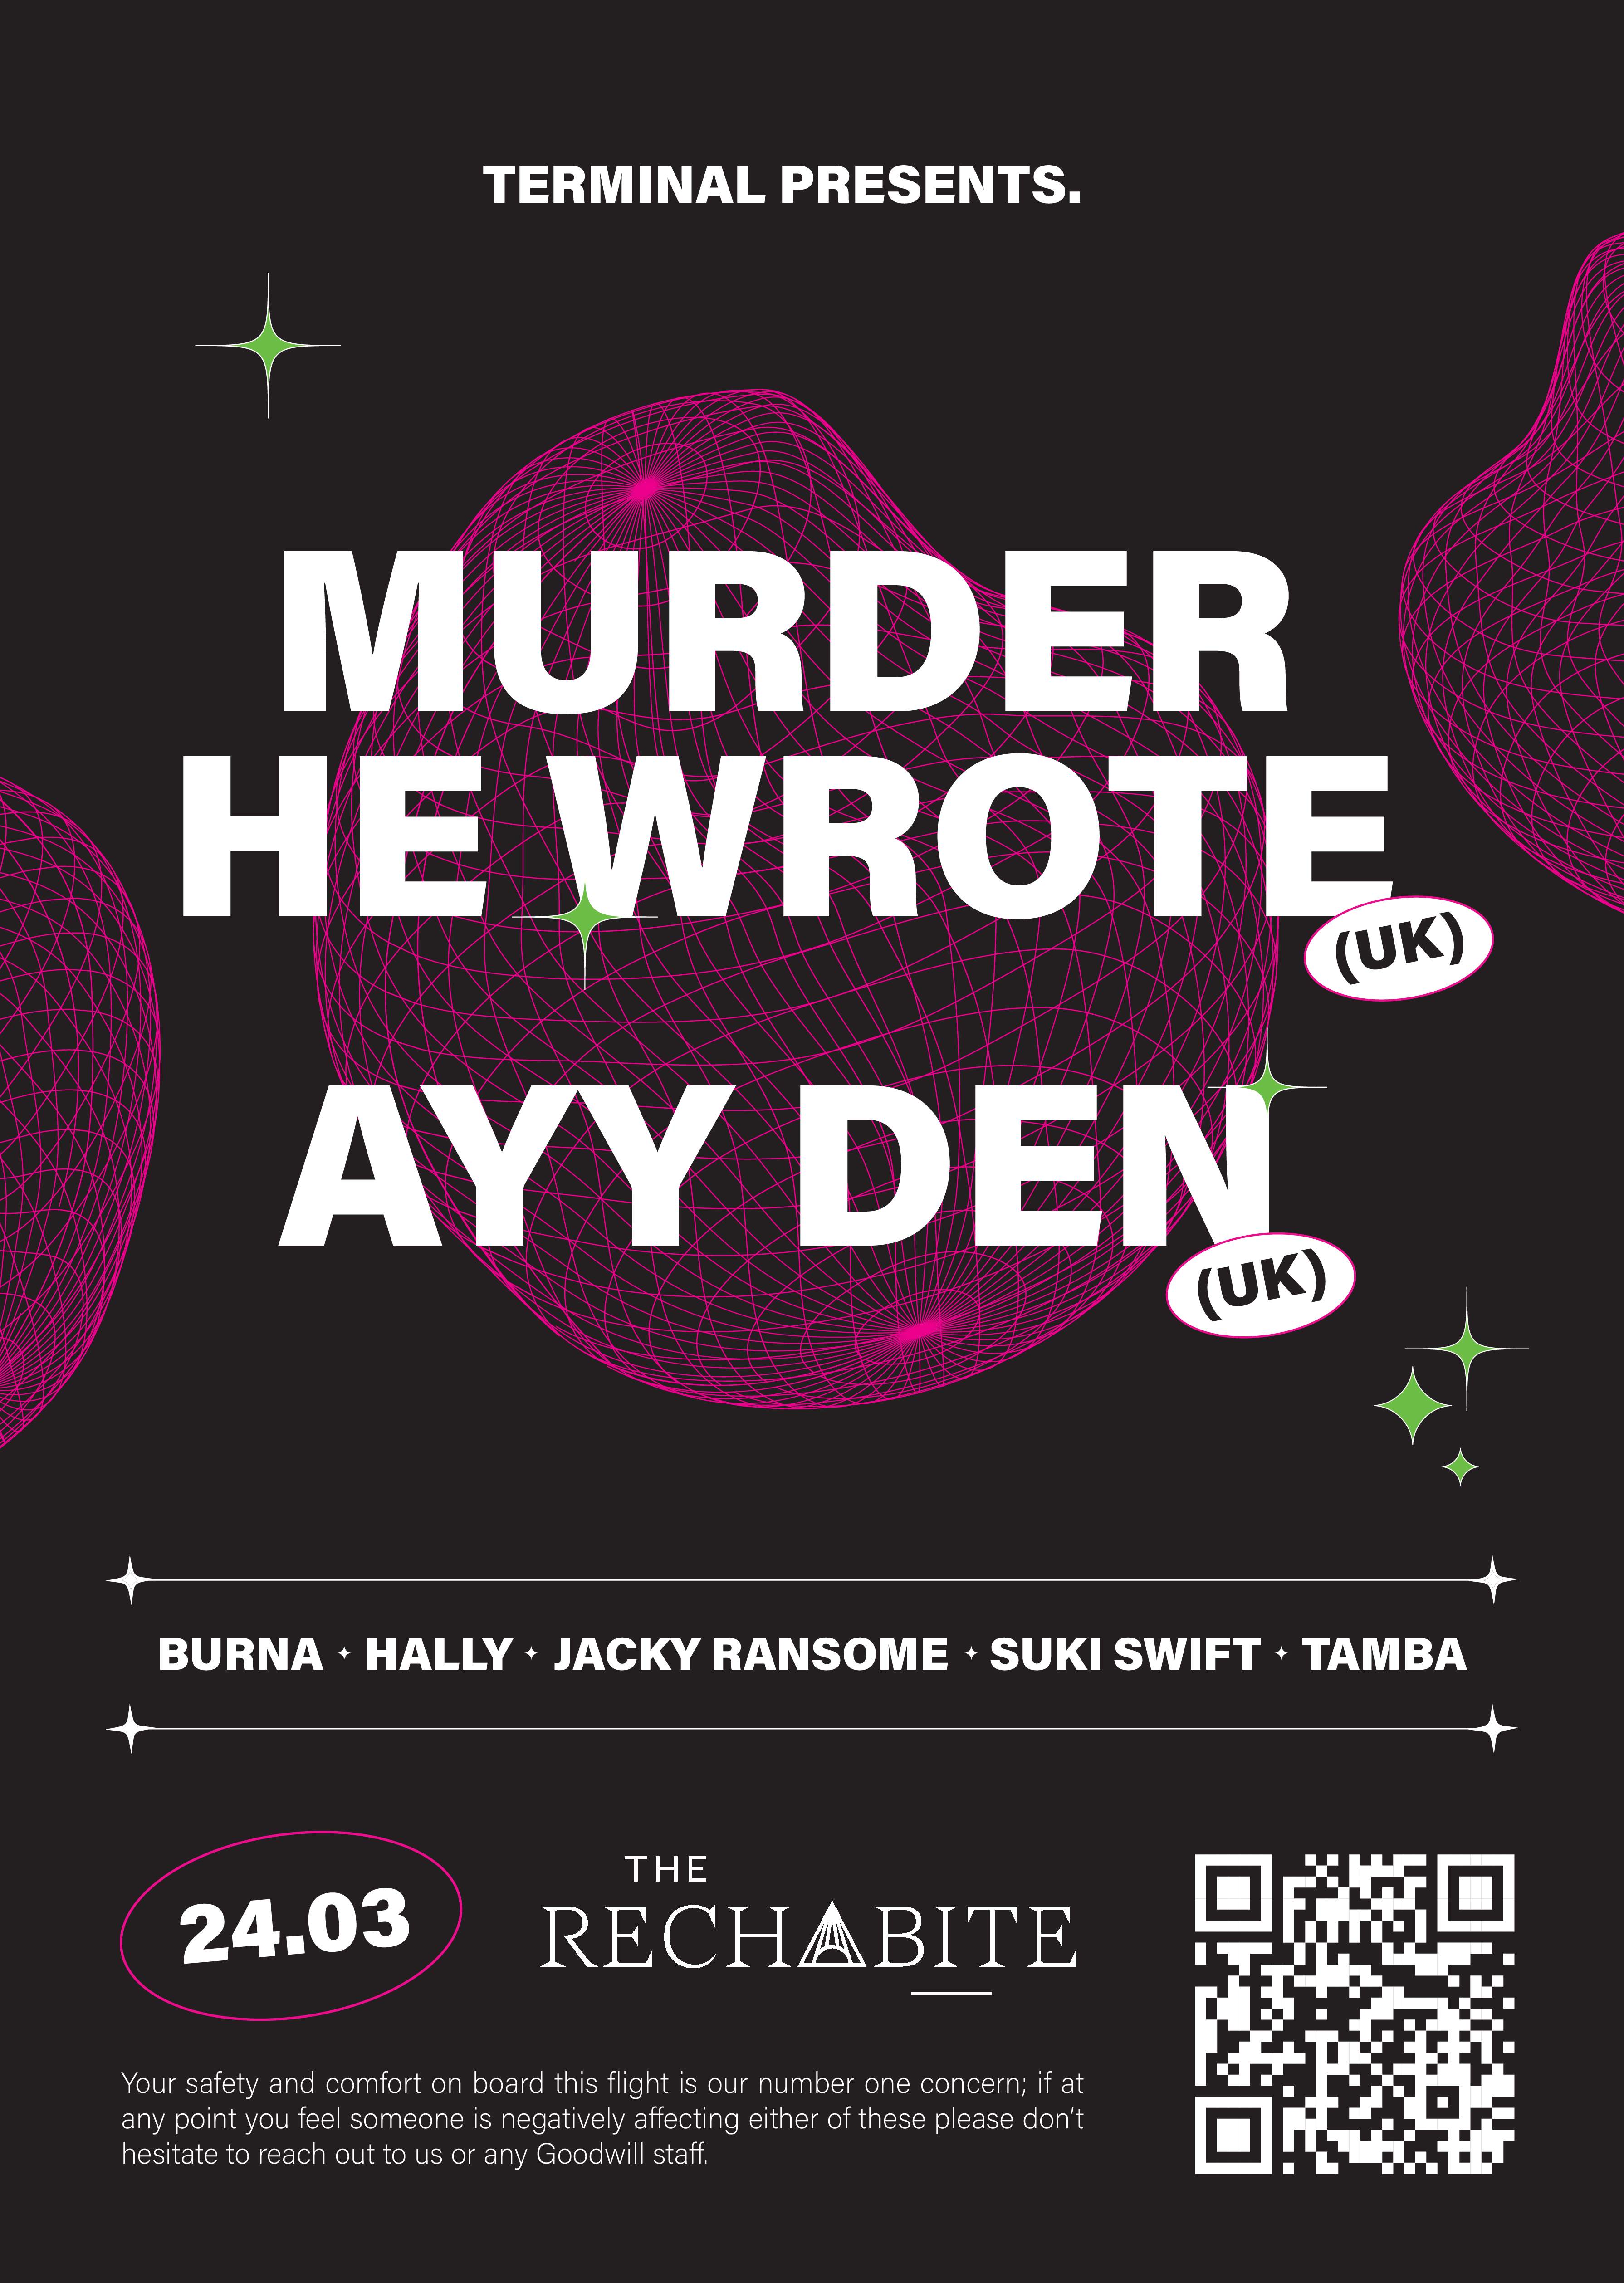 Terminal presents: Murder He Wrote and Ayy Den - Página frontal